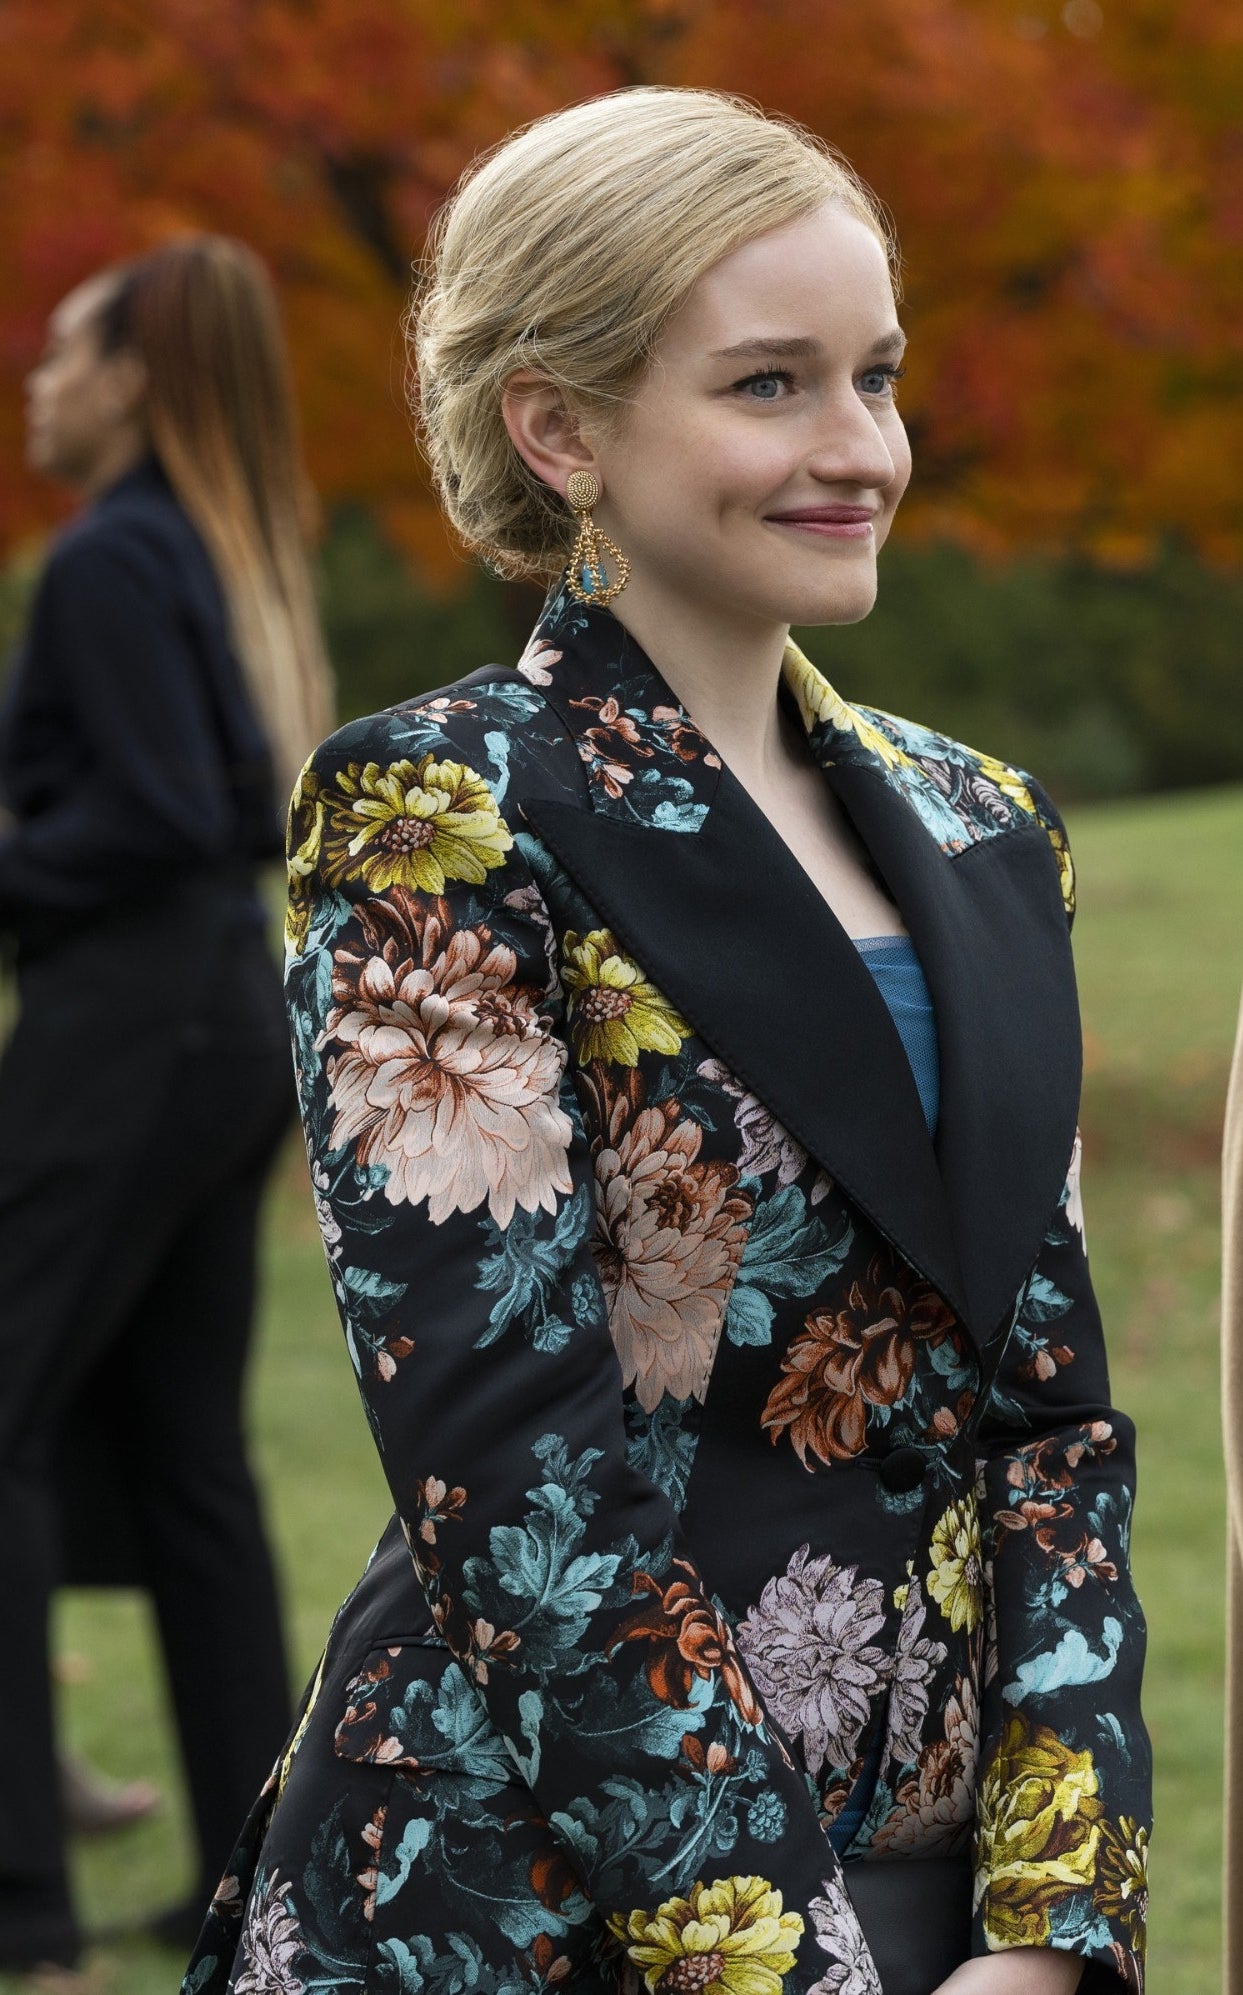 Anna wears a structured floral suit